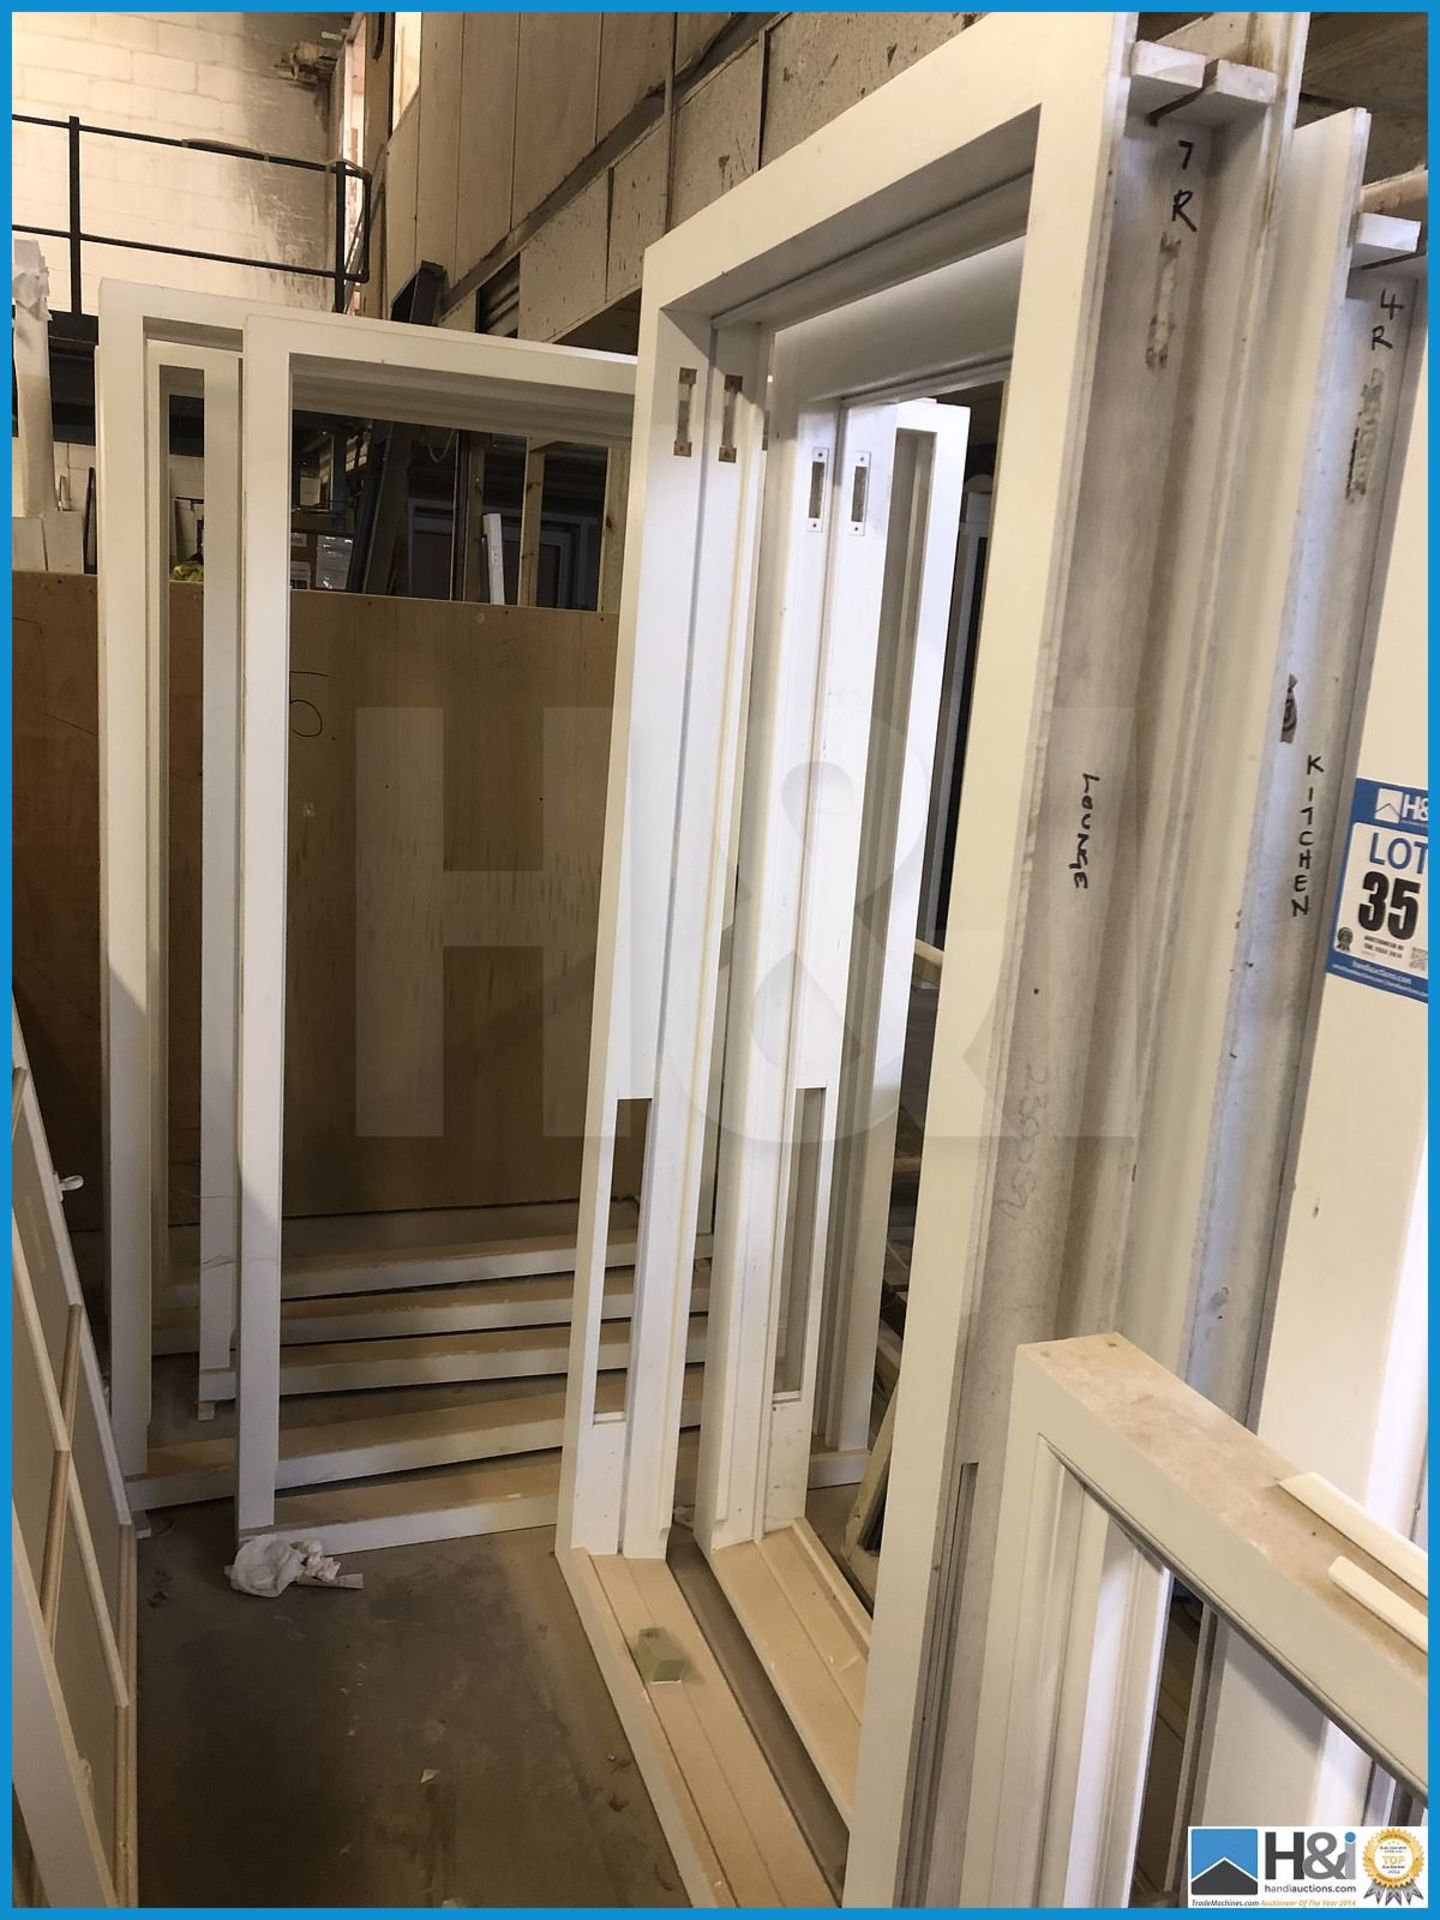 Various newly made windows and internal door frame - Image 2 of 3